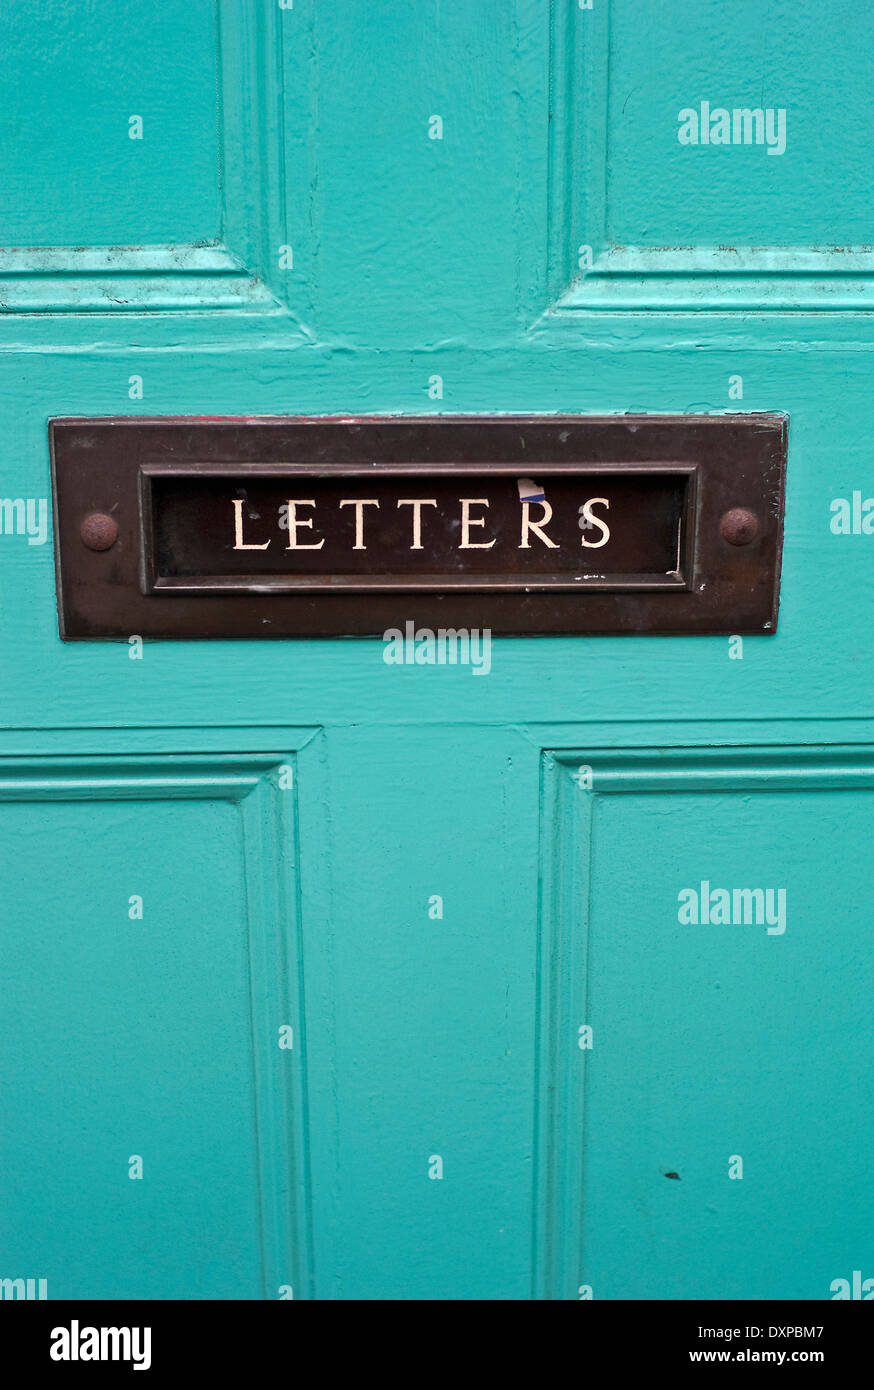 Aqua marine colored front door letterbox with the word letters on it Stock Photo